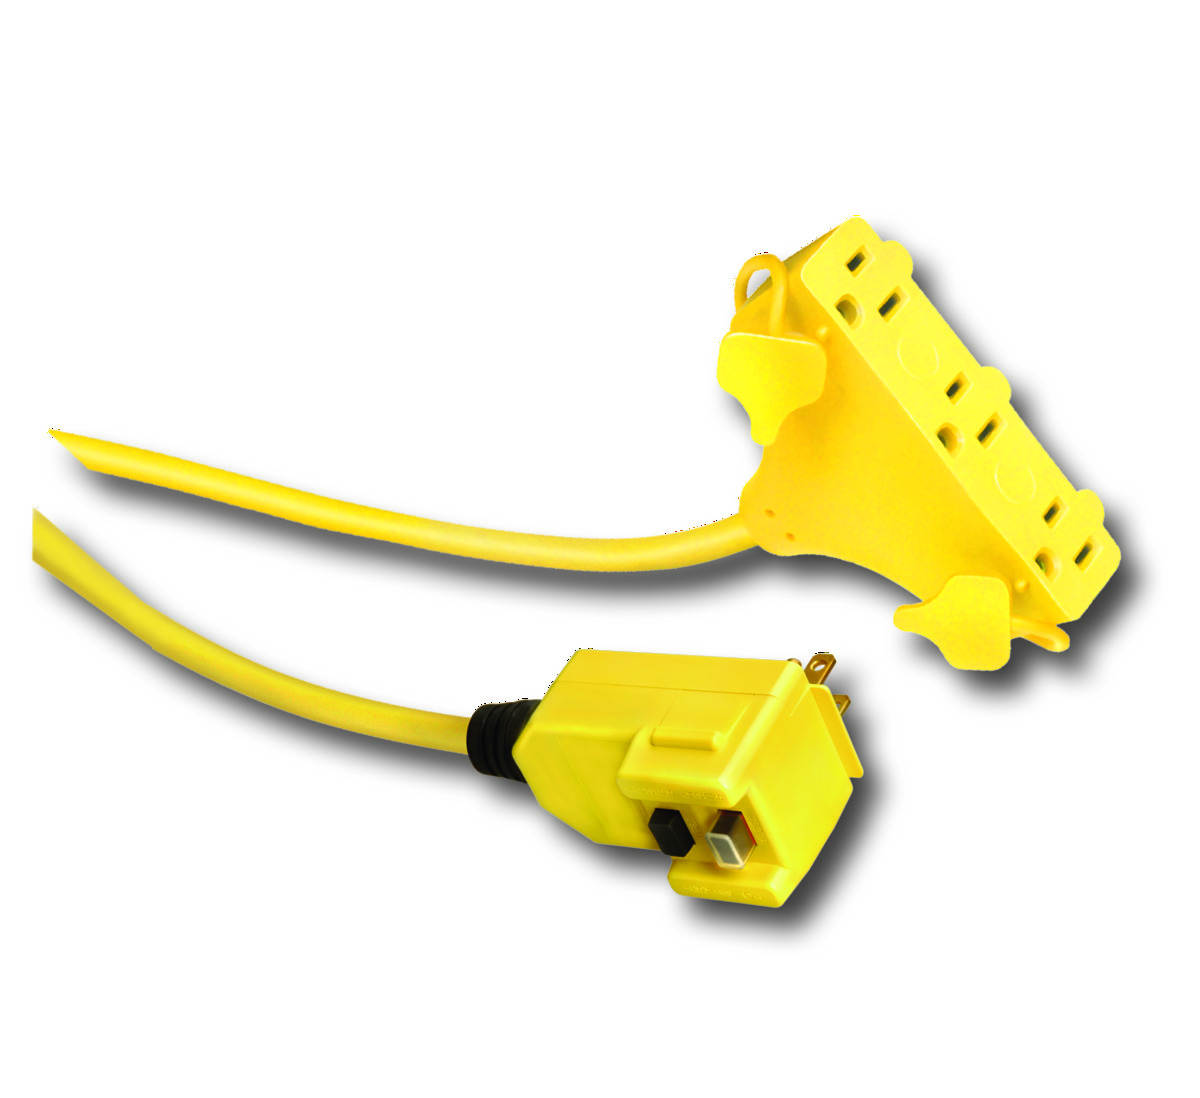 Toolbox Talk: Extension Cord Safety - Garco Construction - General